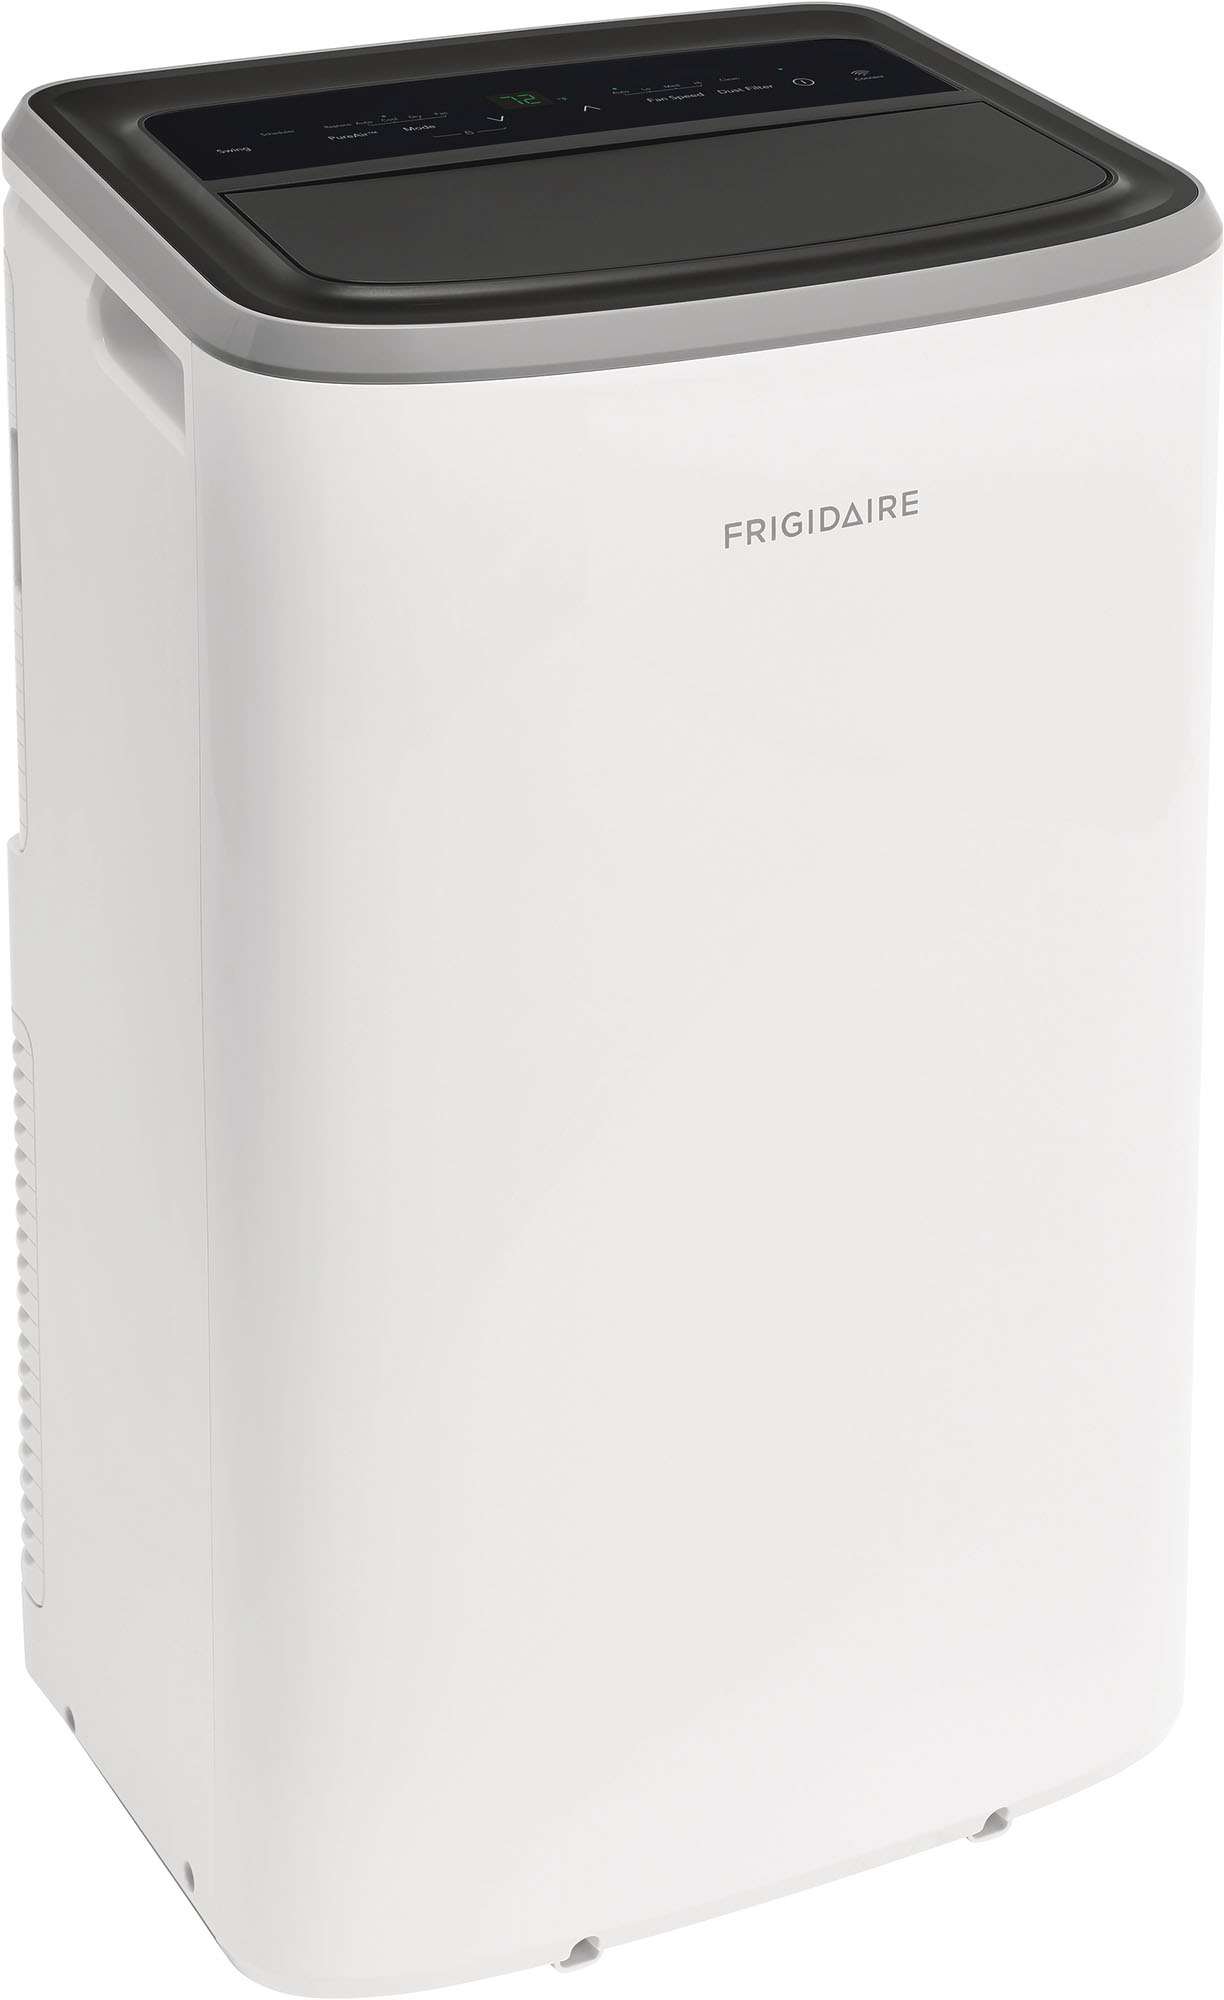 Angle View: Frigidaire - 3–in-1 Portable Room Air Conditioner - White